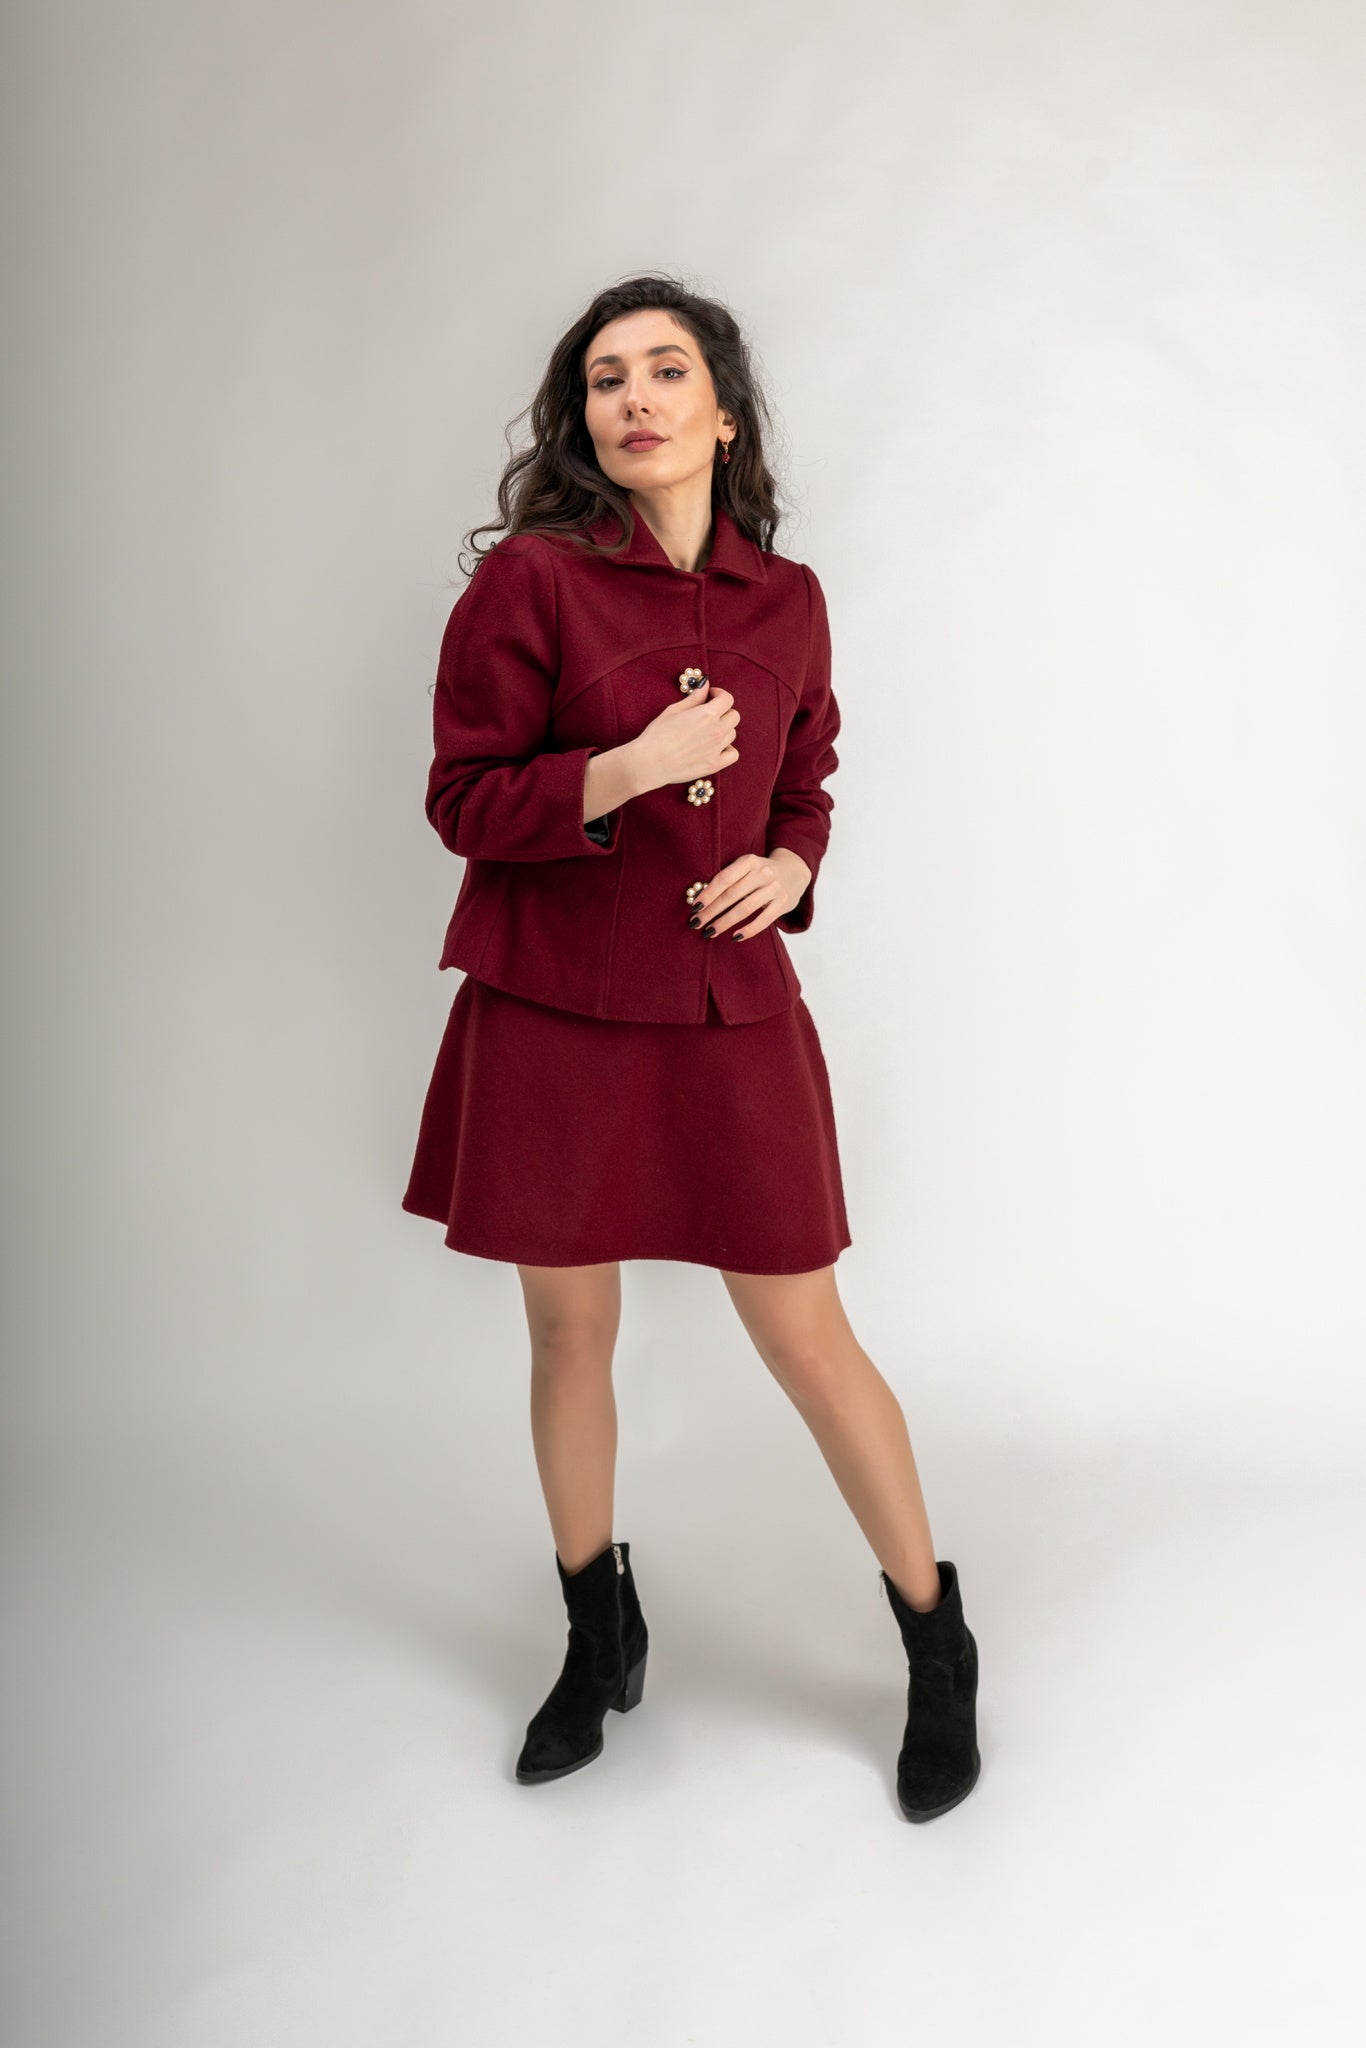 "Daisy" Coat Pearl Buttons In Burgundy